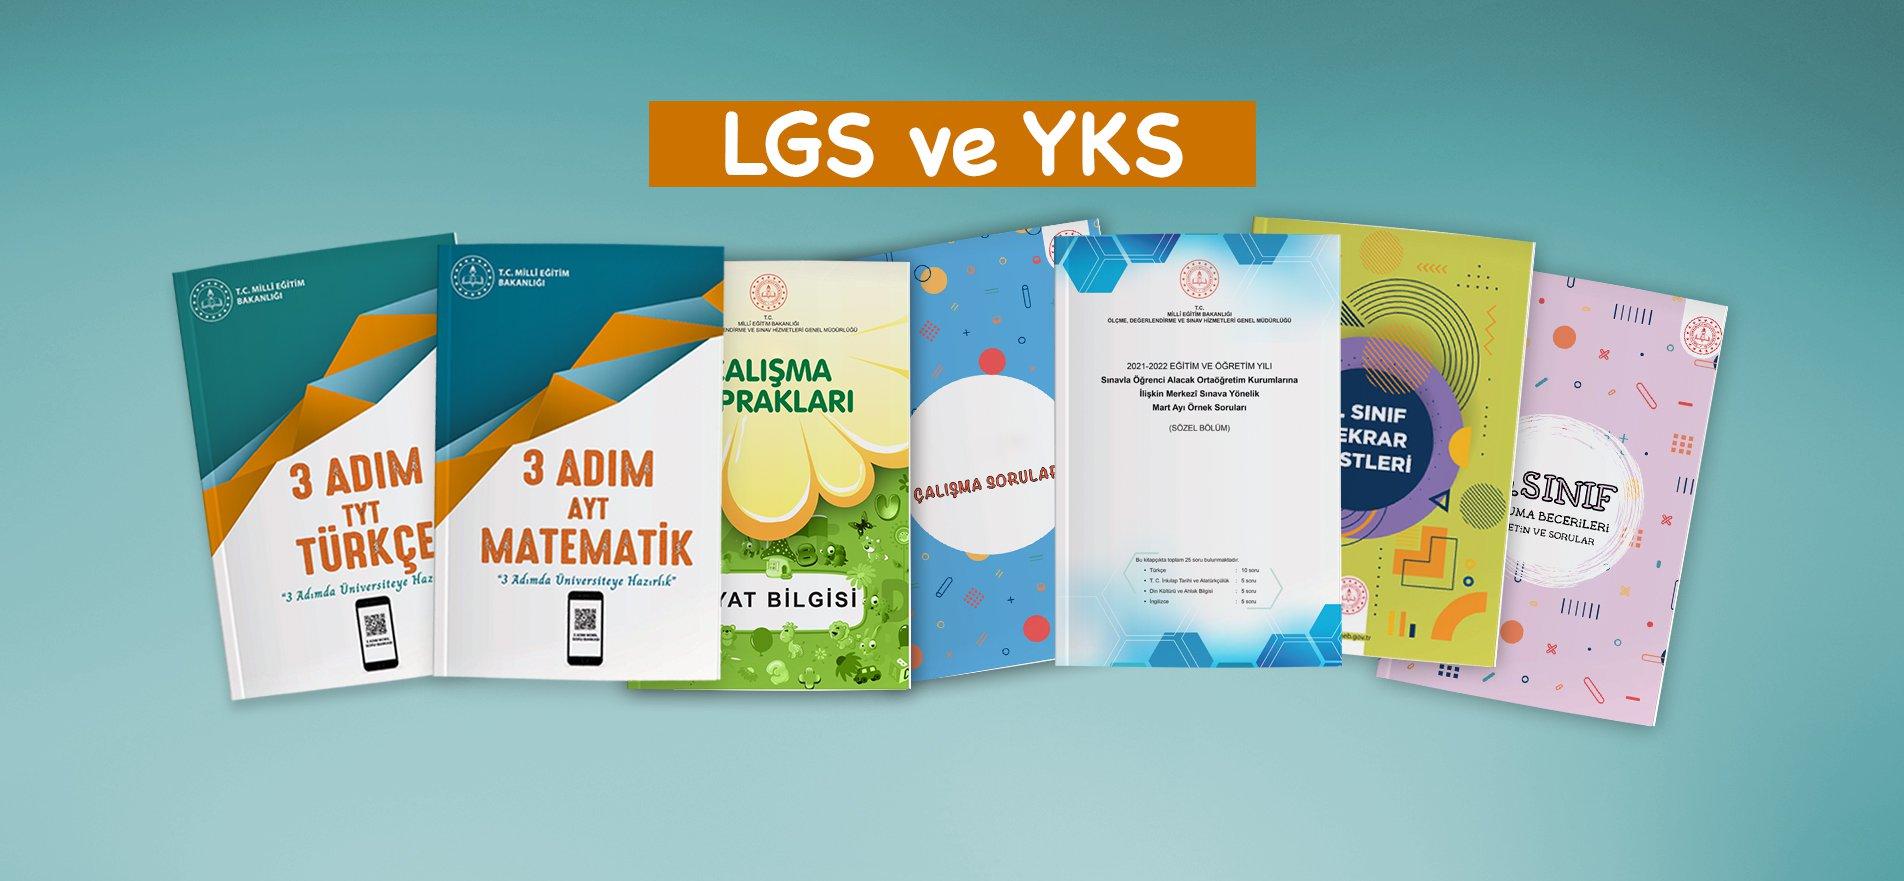 THE MINISTRY HAS DISTRIBUTED 15 MILLION SUPPLEMENTARY SOURCES FOR STUDENTS WHO WILL ENTER LGS AND YKS EXAMS